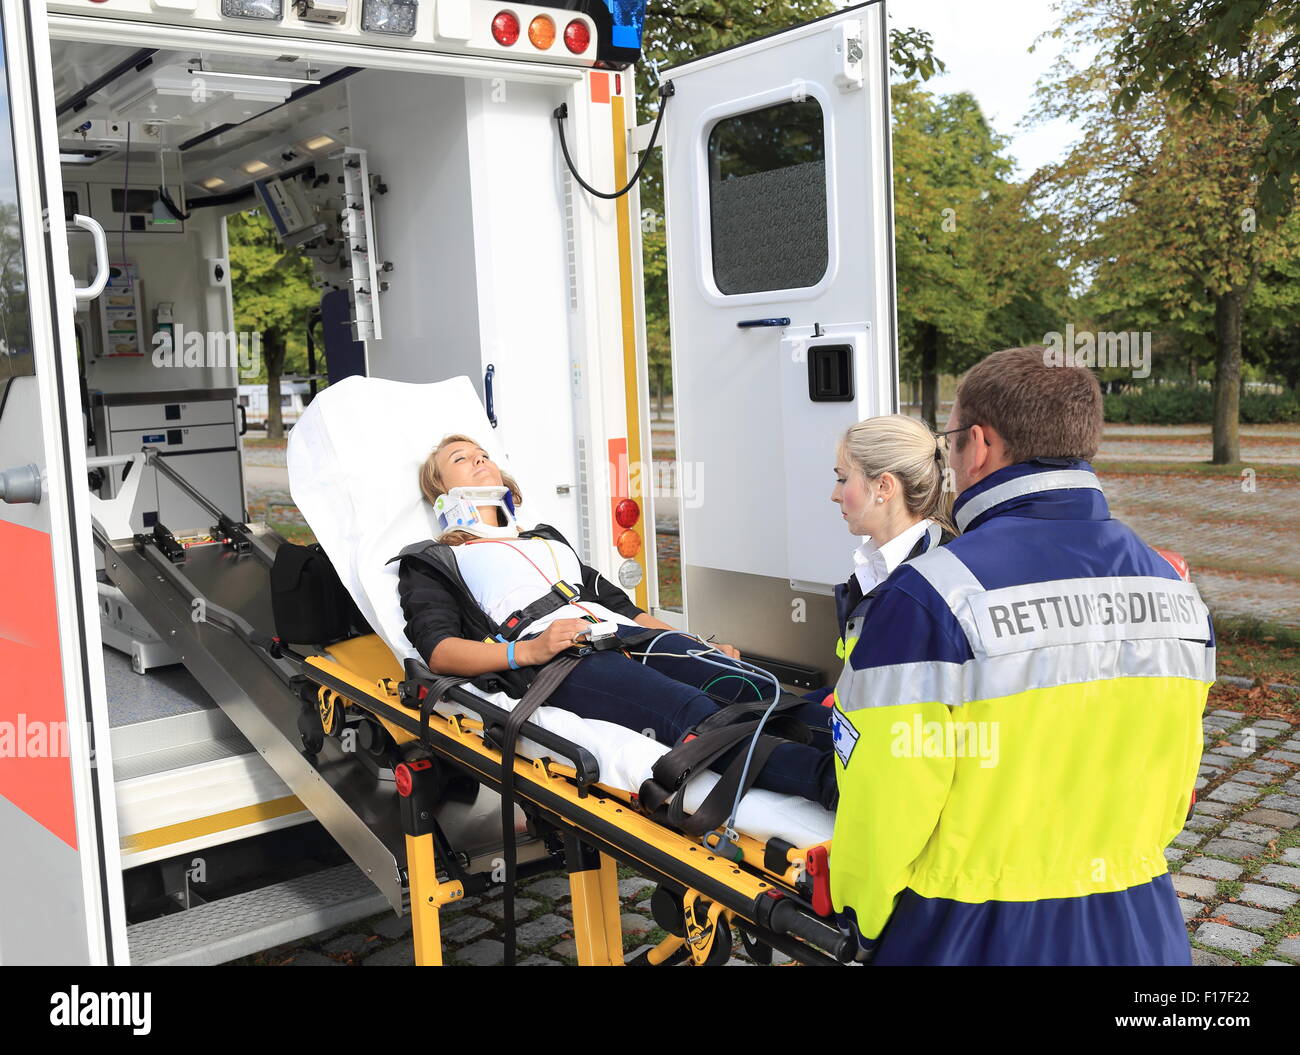 A Women on stretcher with stiffneck and Ambulance after accident Stock Photo